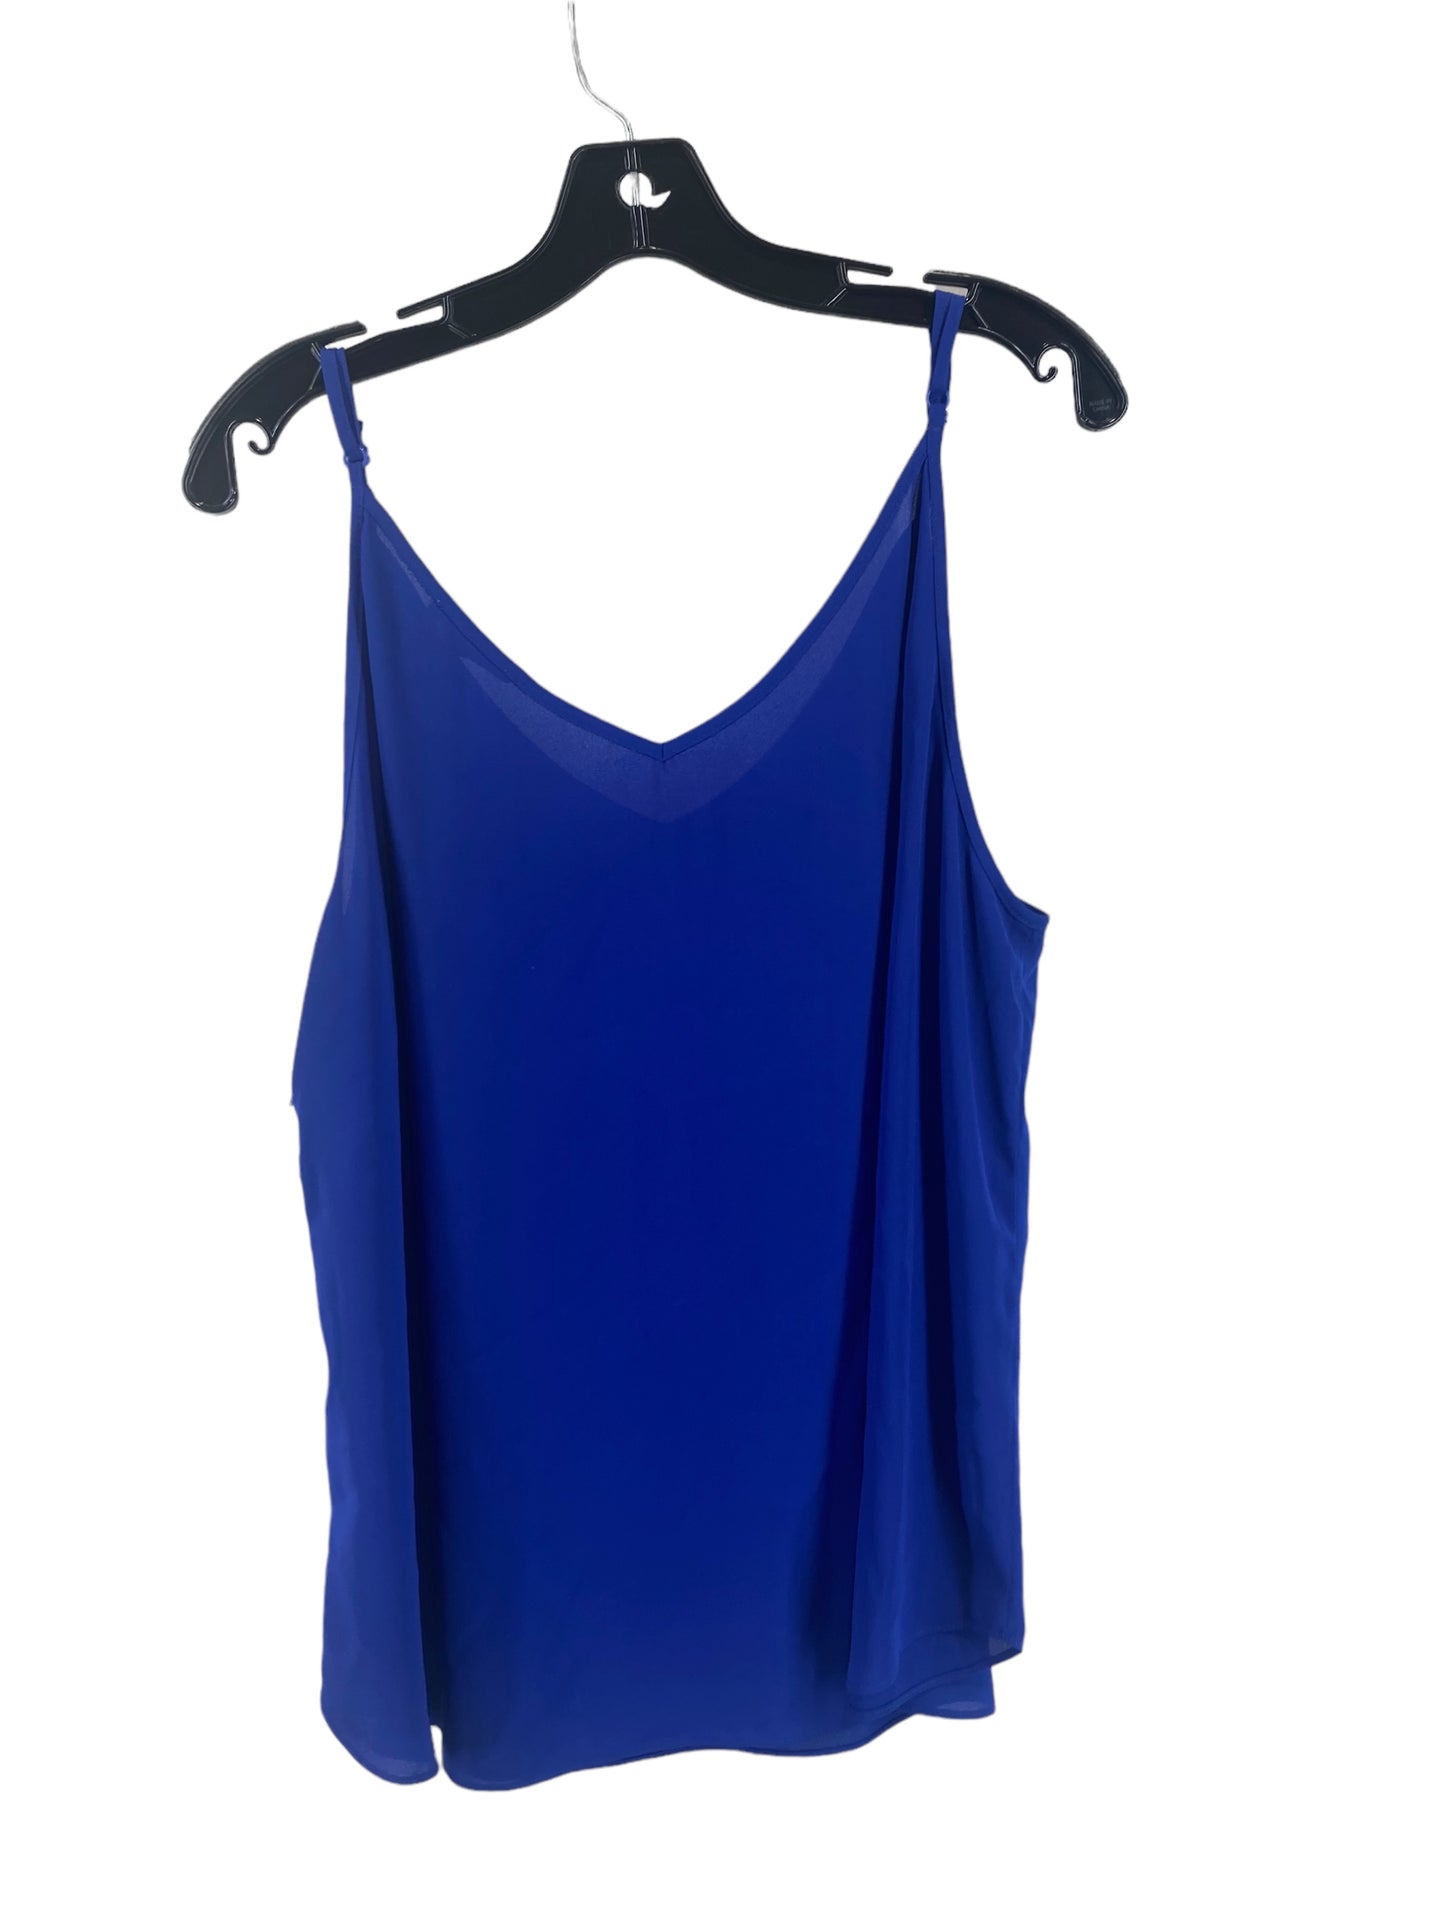 Top Cami By Clothes Mentor  Size: Xl